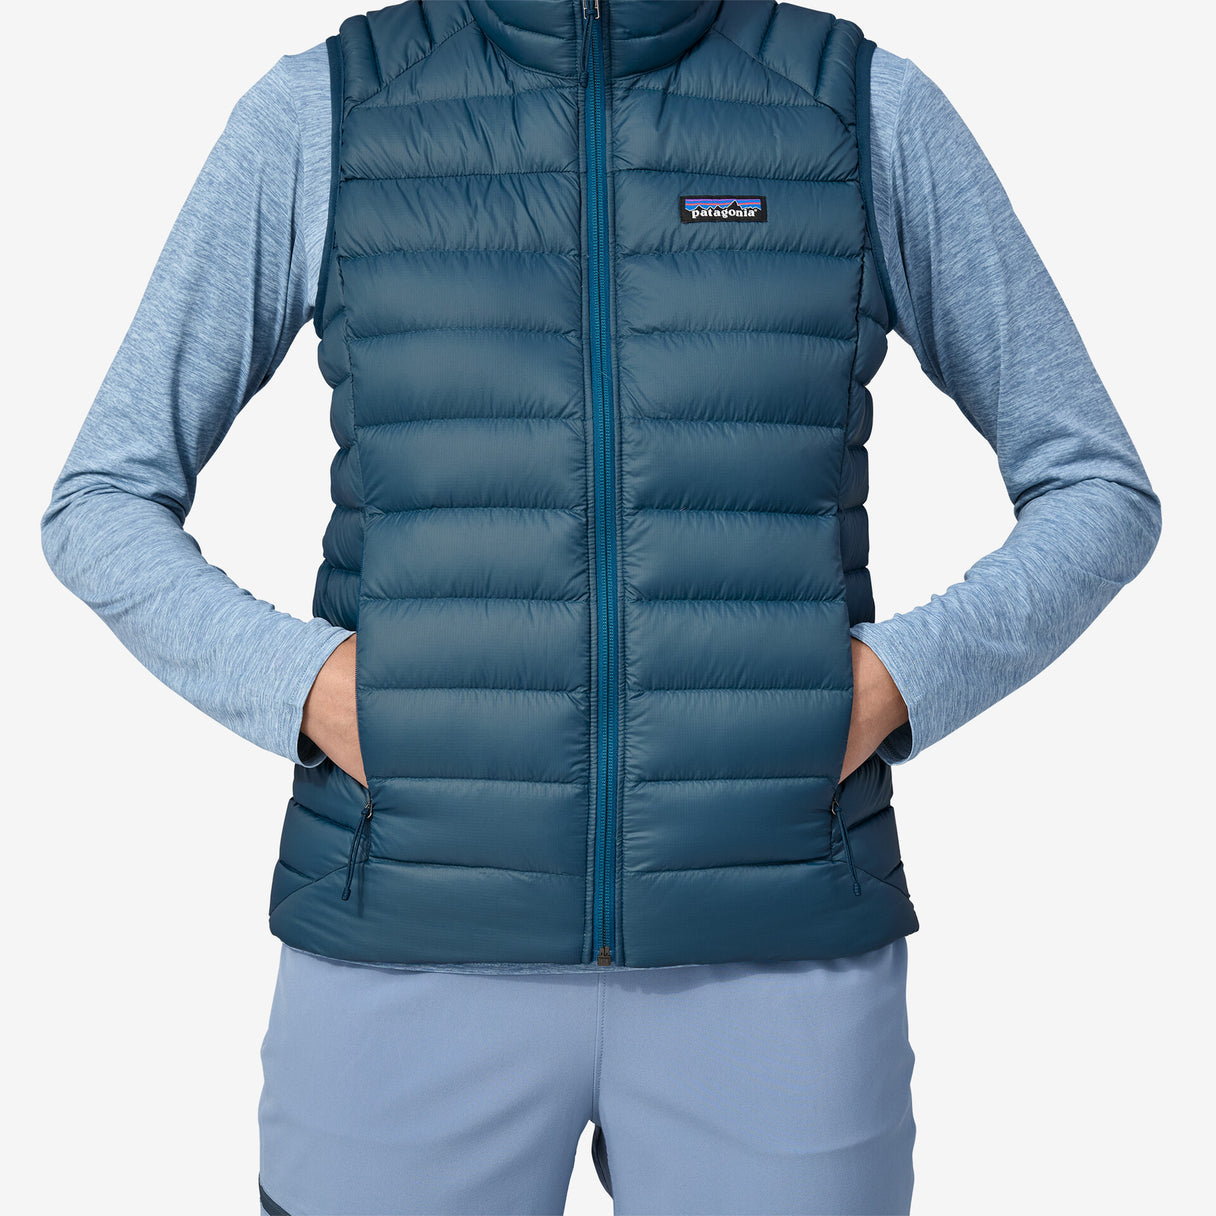 Patagonia Women's Down Sweater Vest - Conifer Green XS